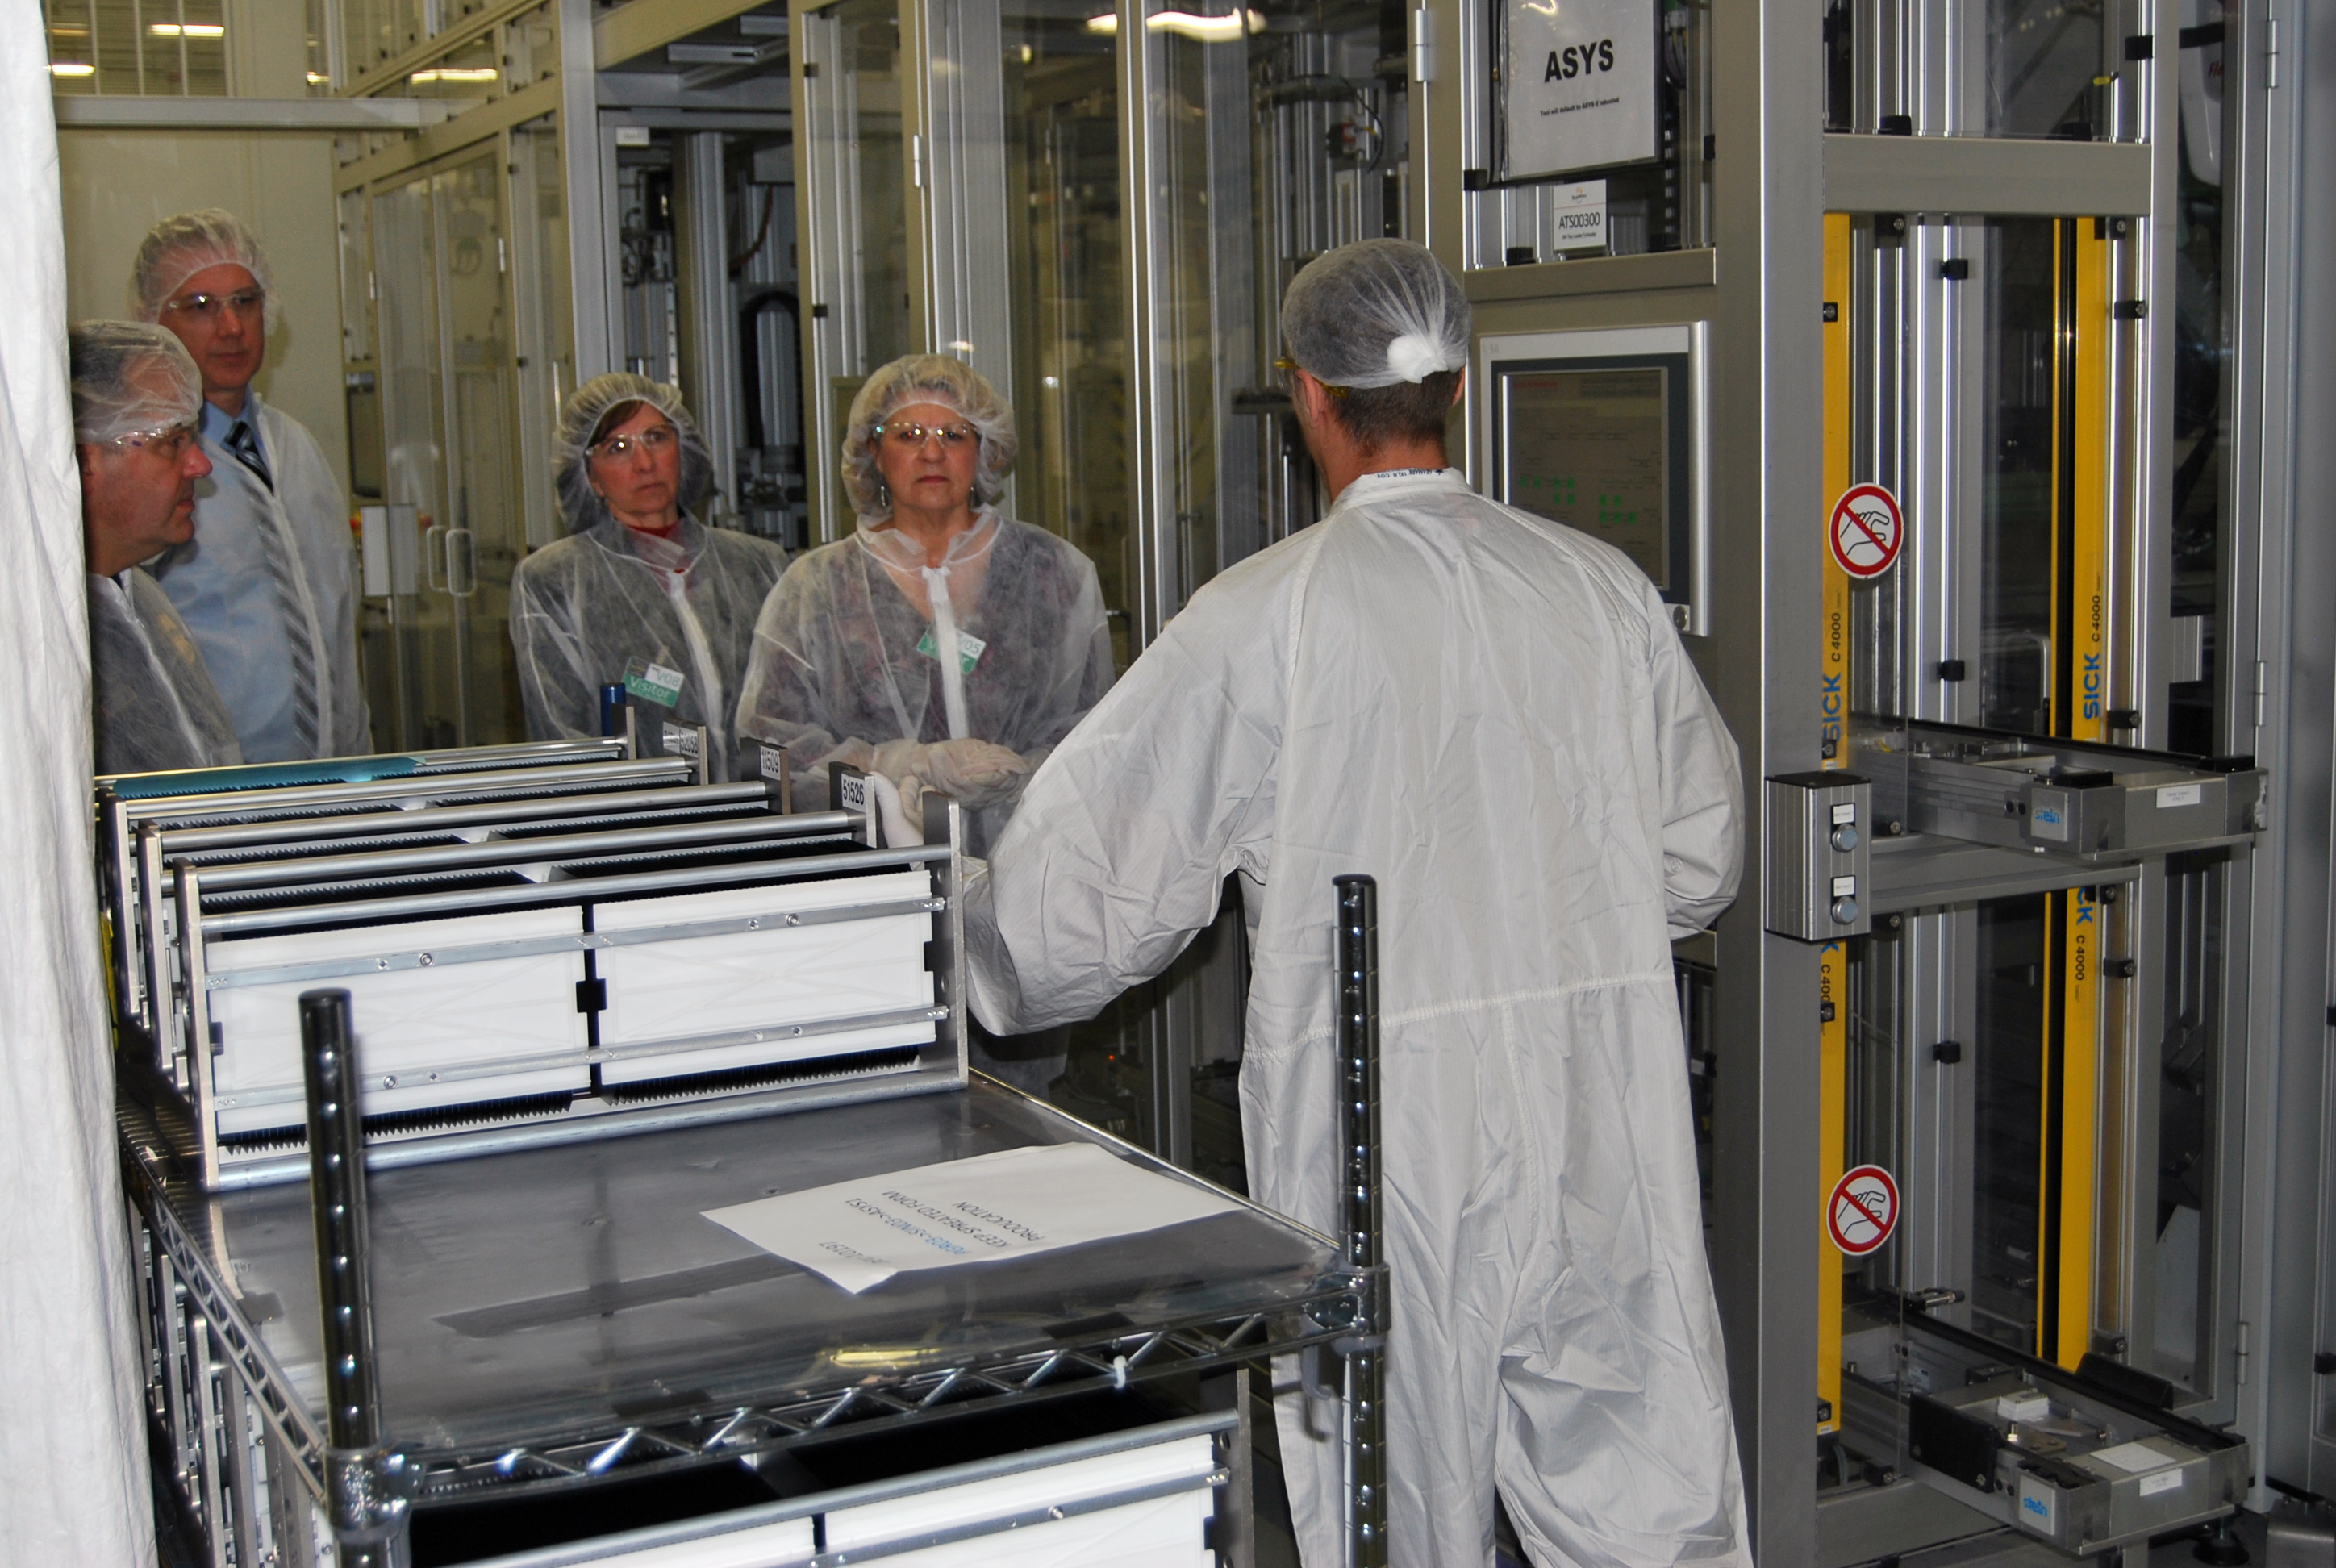 A SolarWorld employee shares details of solar cell production with CBP employees, l-r, Erich Mohr, Steve Lewis, Kristy Huckins and Katie Schultz. Photo by Ed Colford